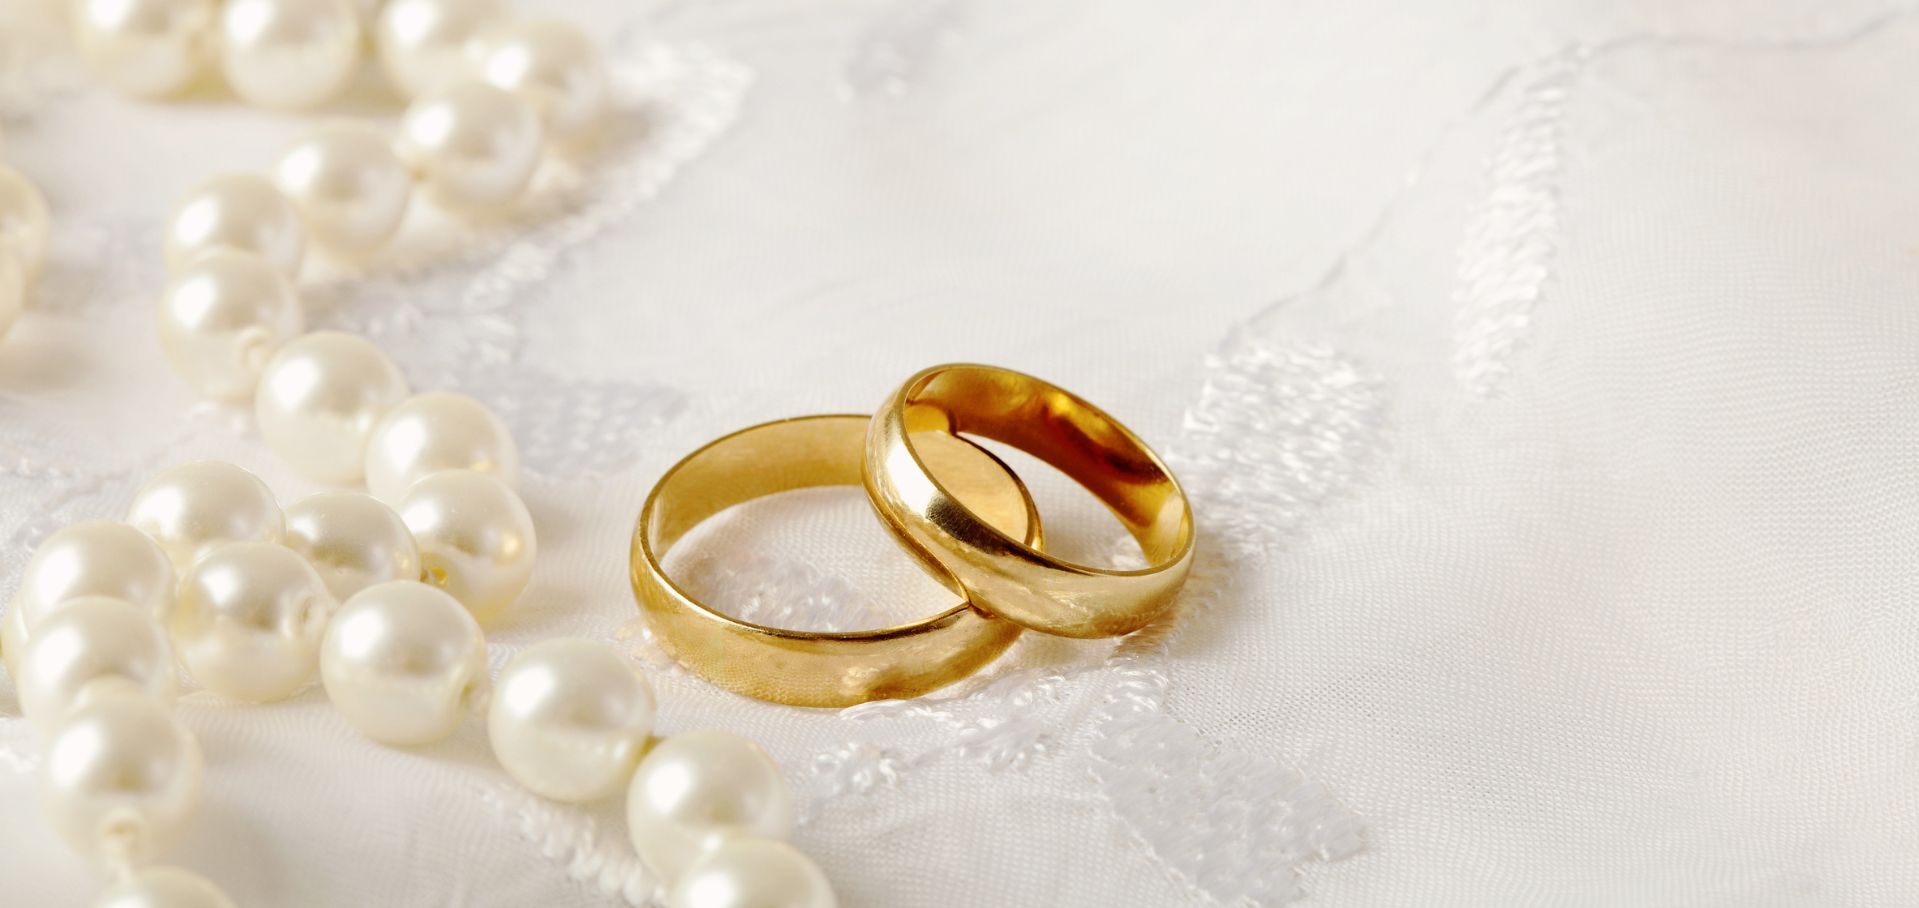 Tips For Buying Sterling Wedding Rings